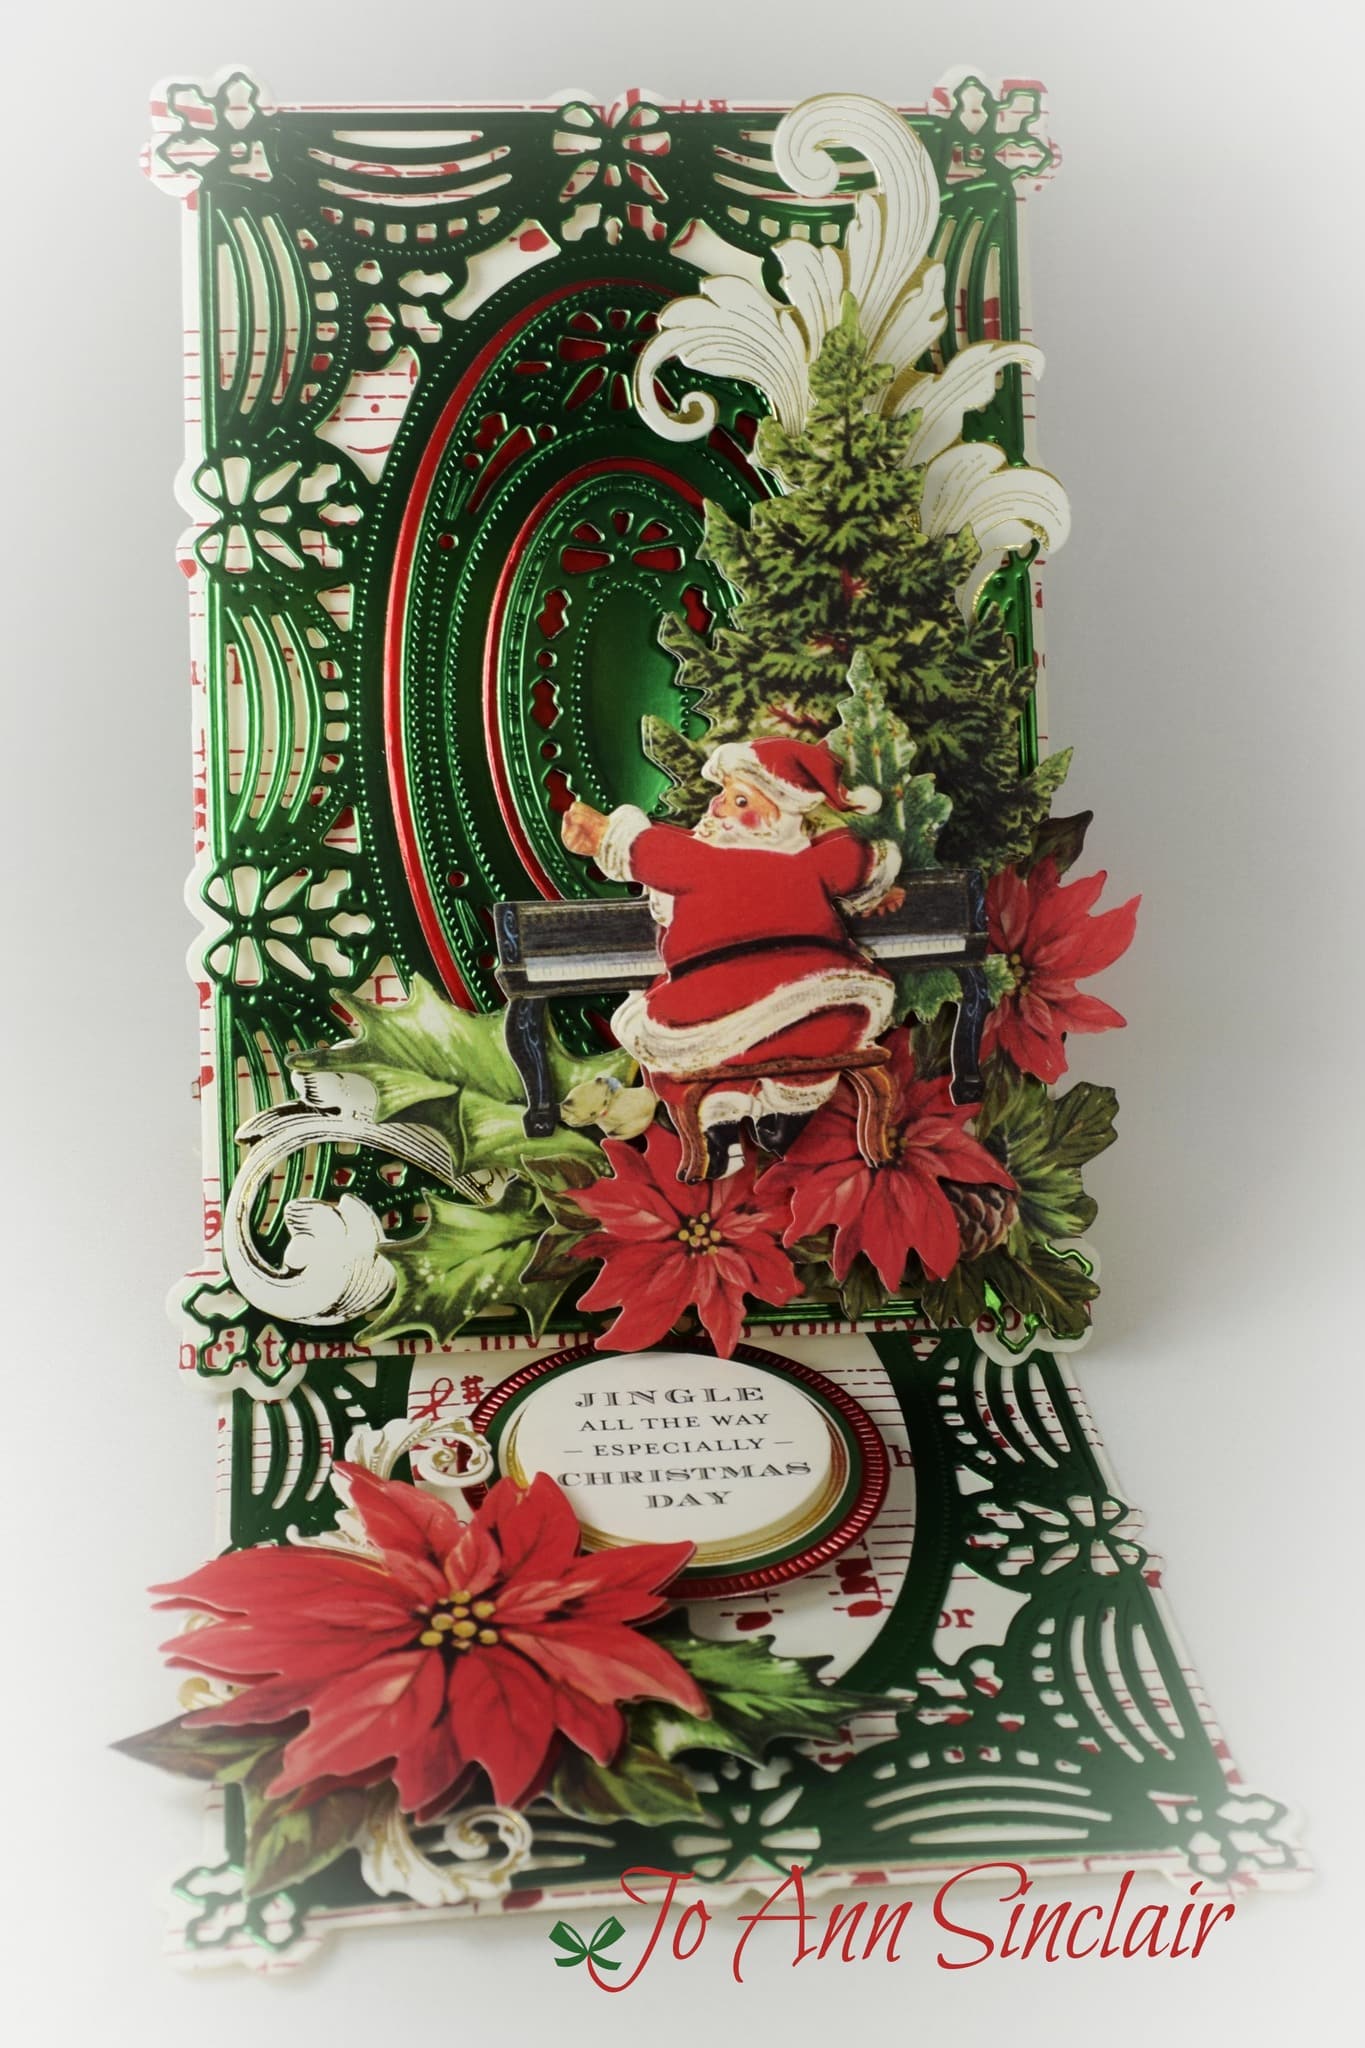 A christmas card with a santa claus sitting on a bench.